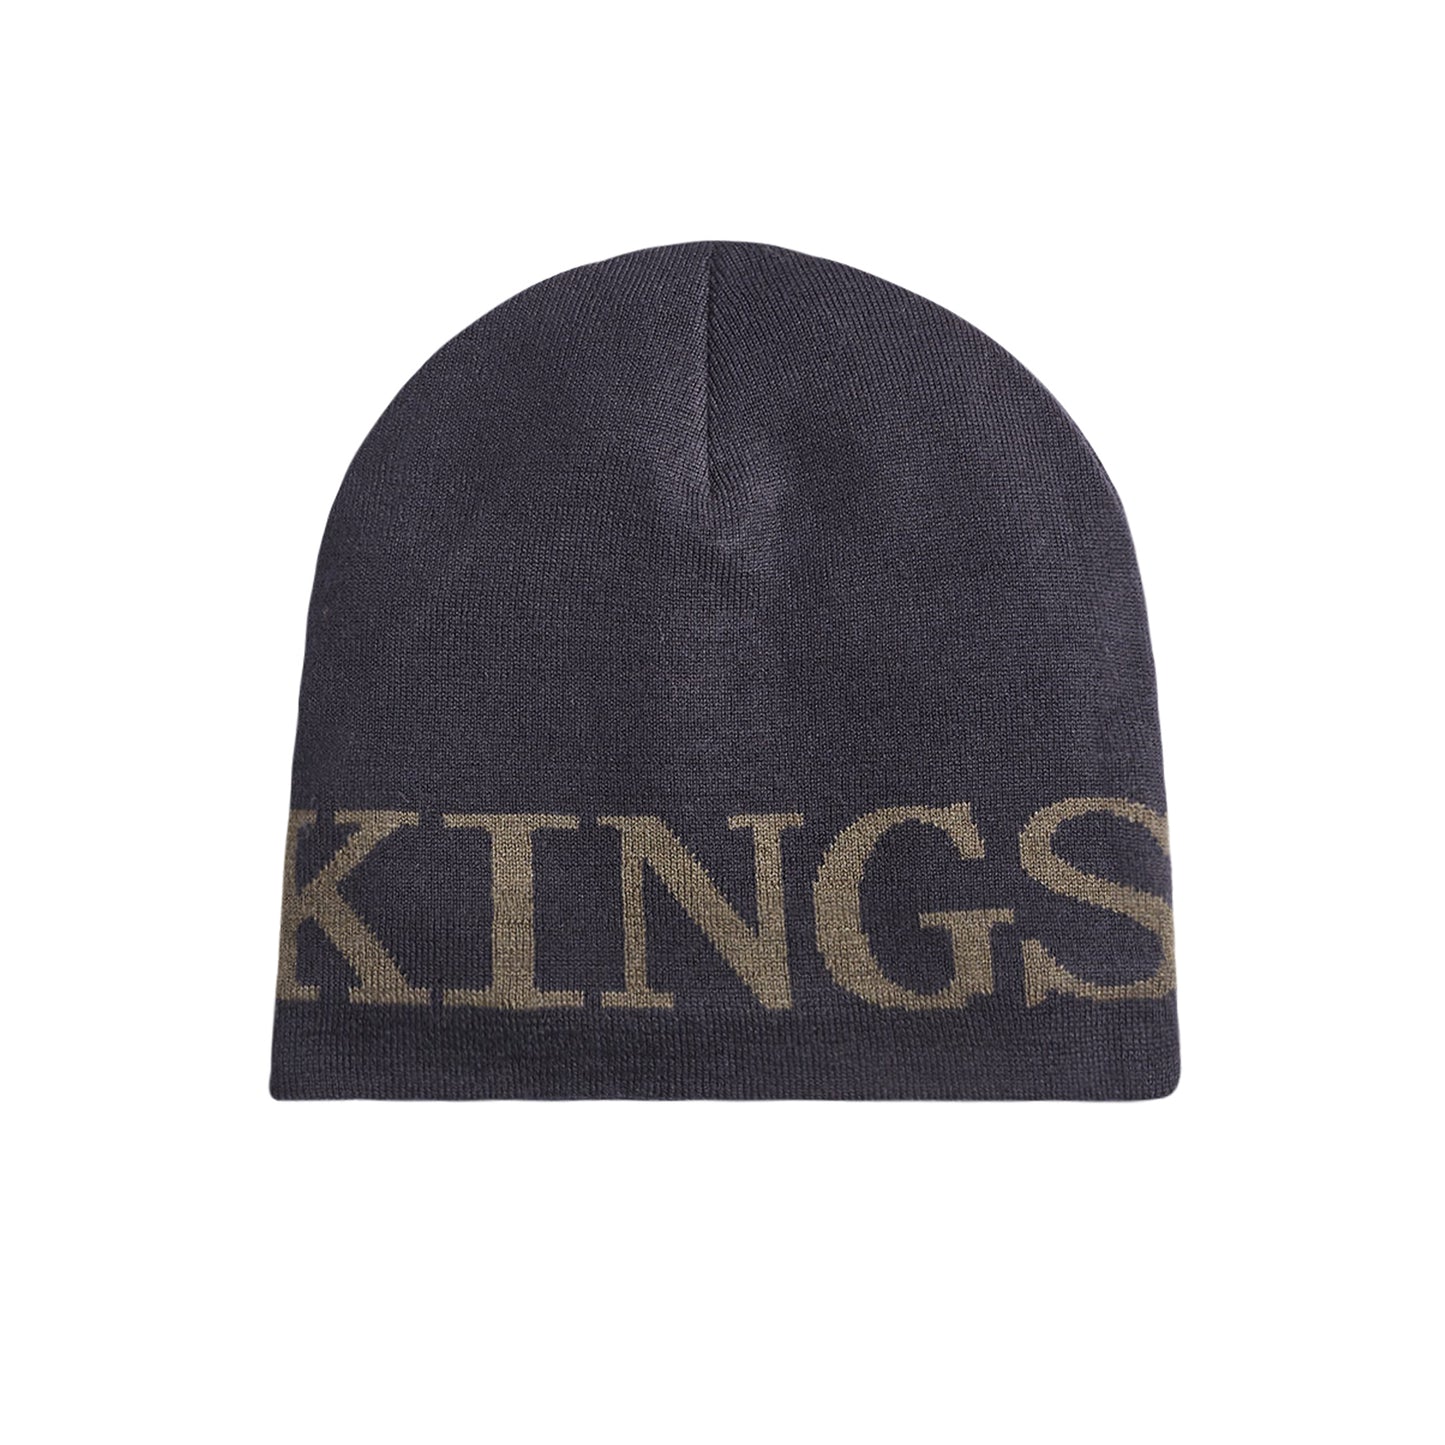 Kingsland Quincy Unisex Knitted Hat